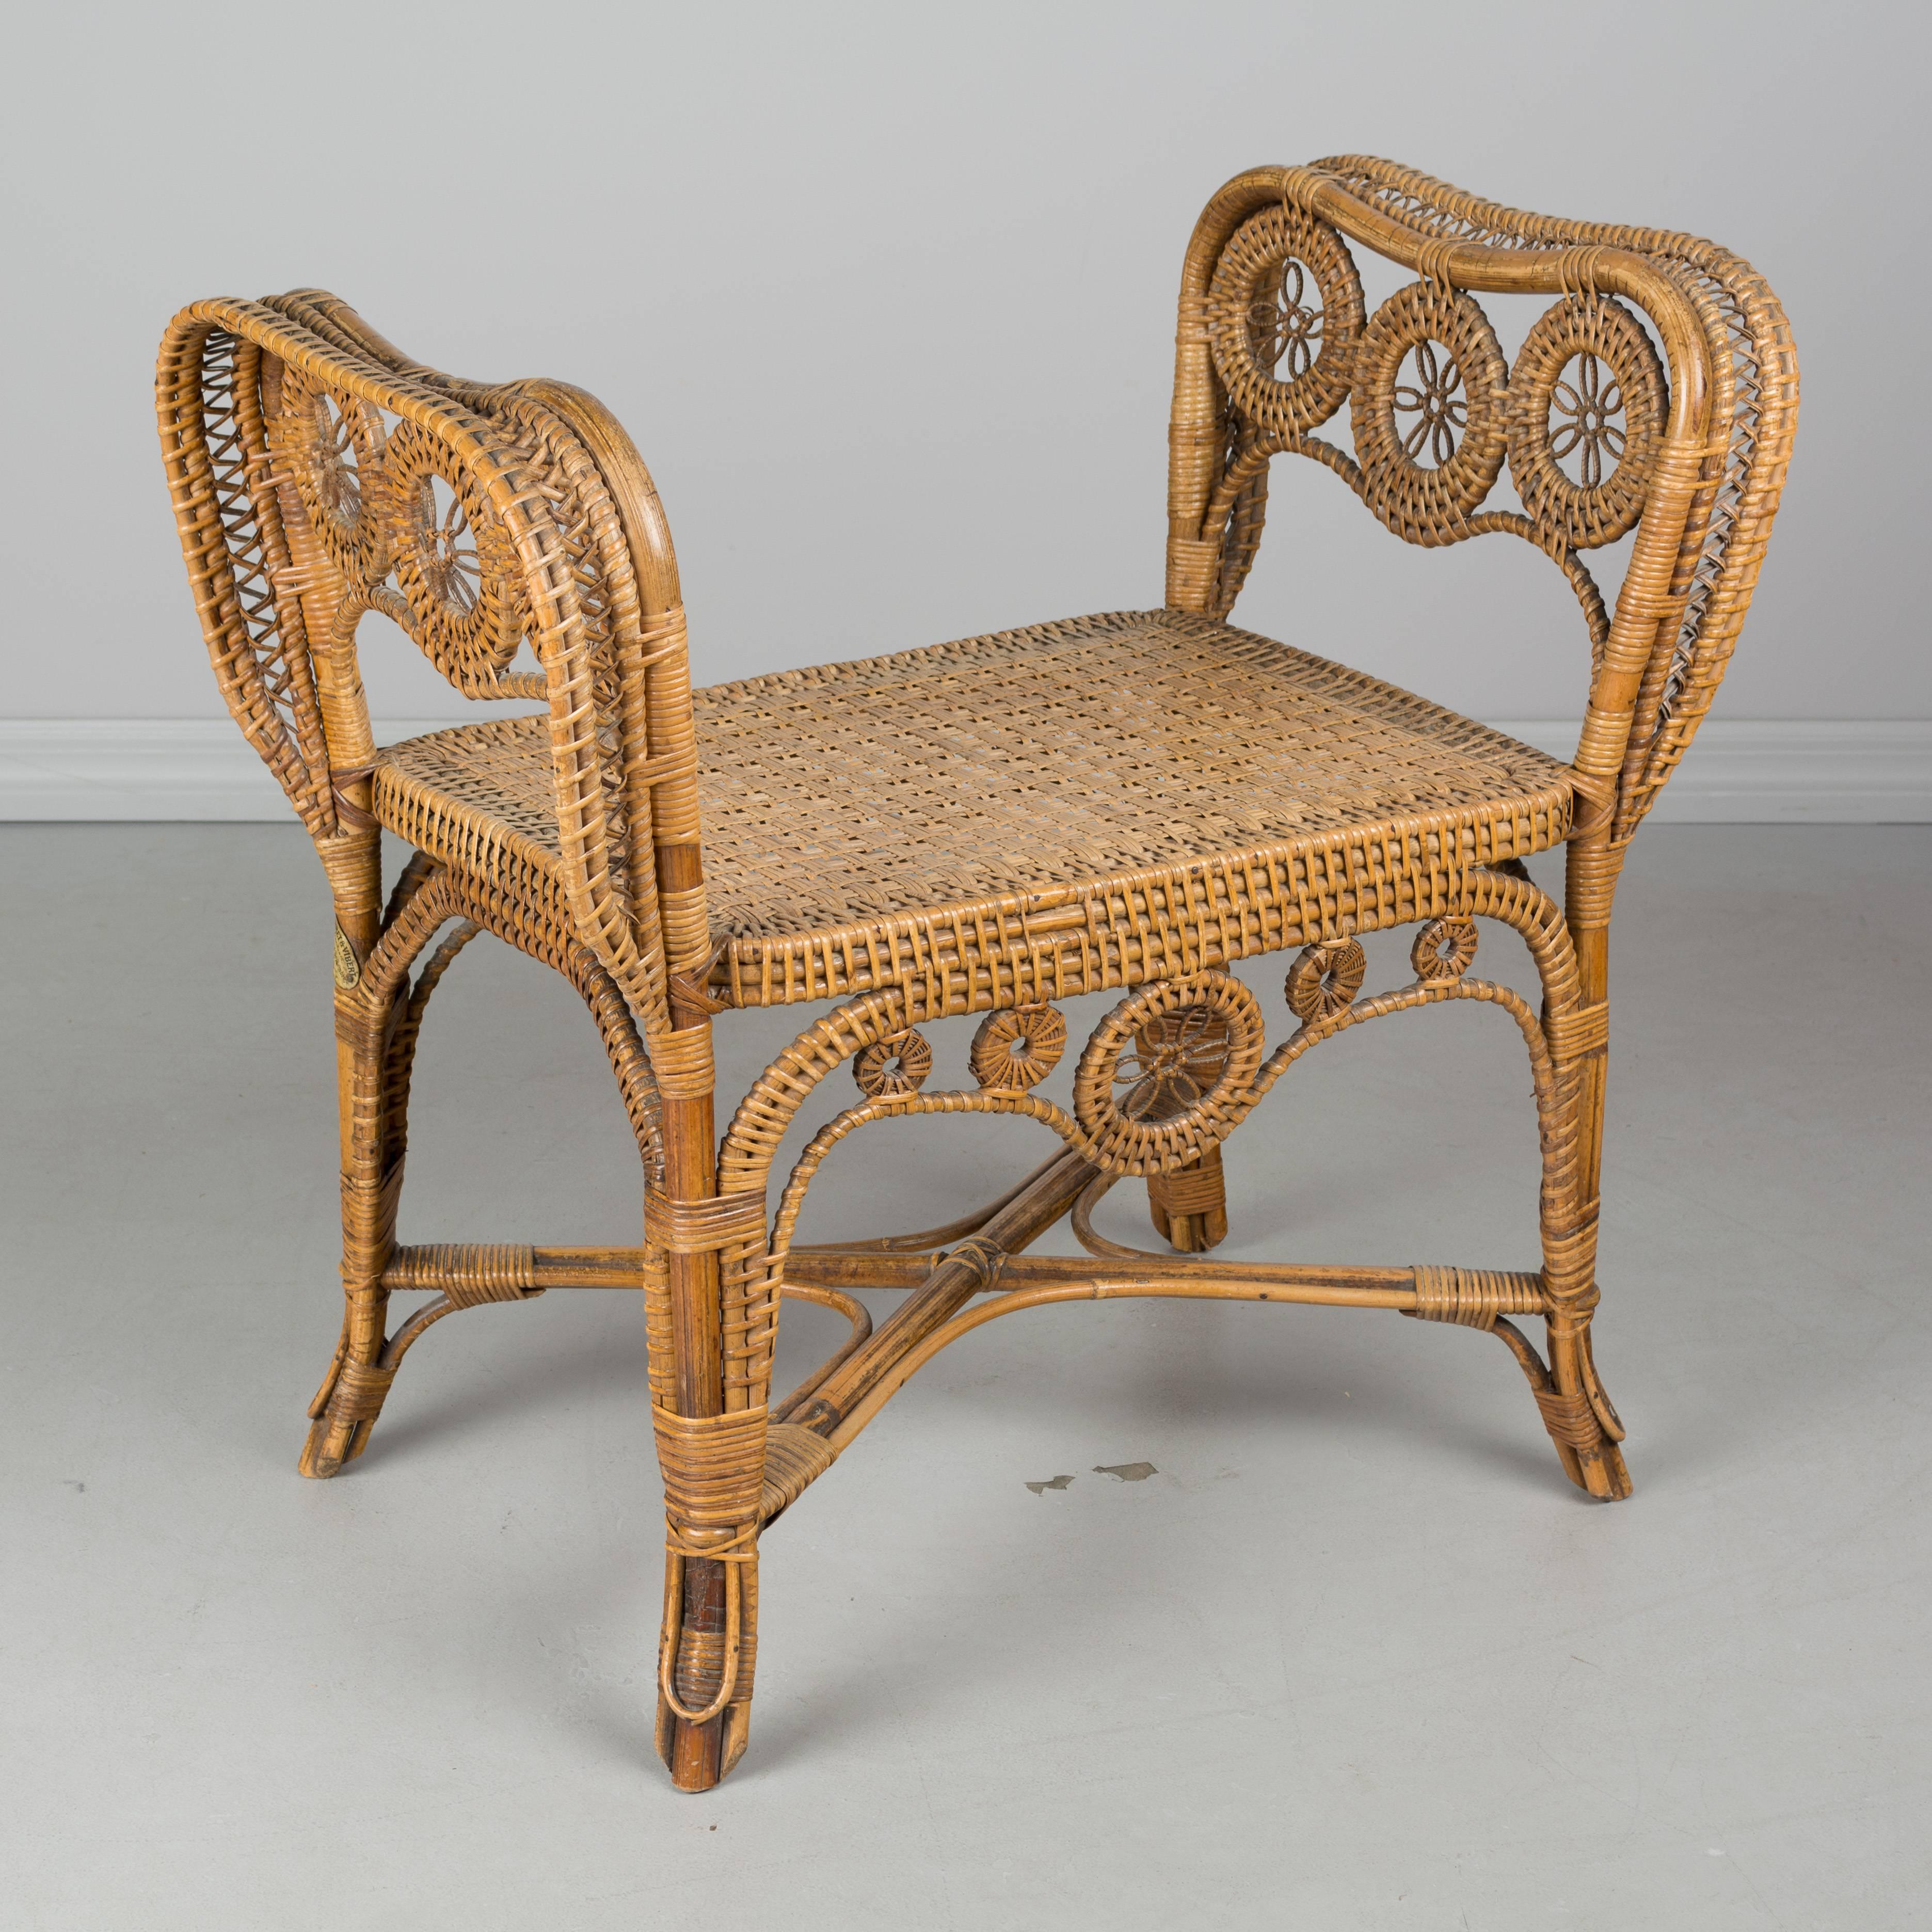 19th century, French wicker bench with bamboo frame. Beautiful scrolling floral design with wide curved sides and tightly woven seat. Sturdy bamboo frame with x-pattern stretcher. Exceptional craftsmanship and with only a few minor losses: petal of